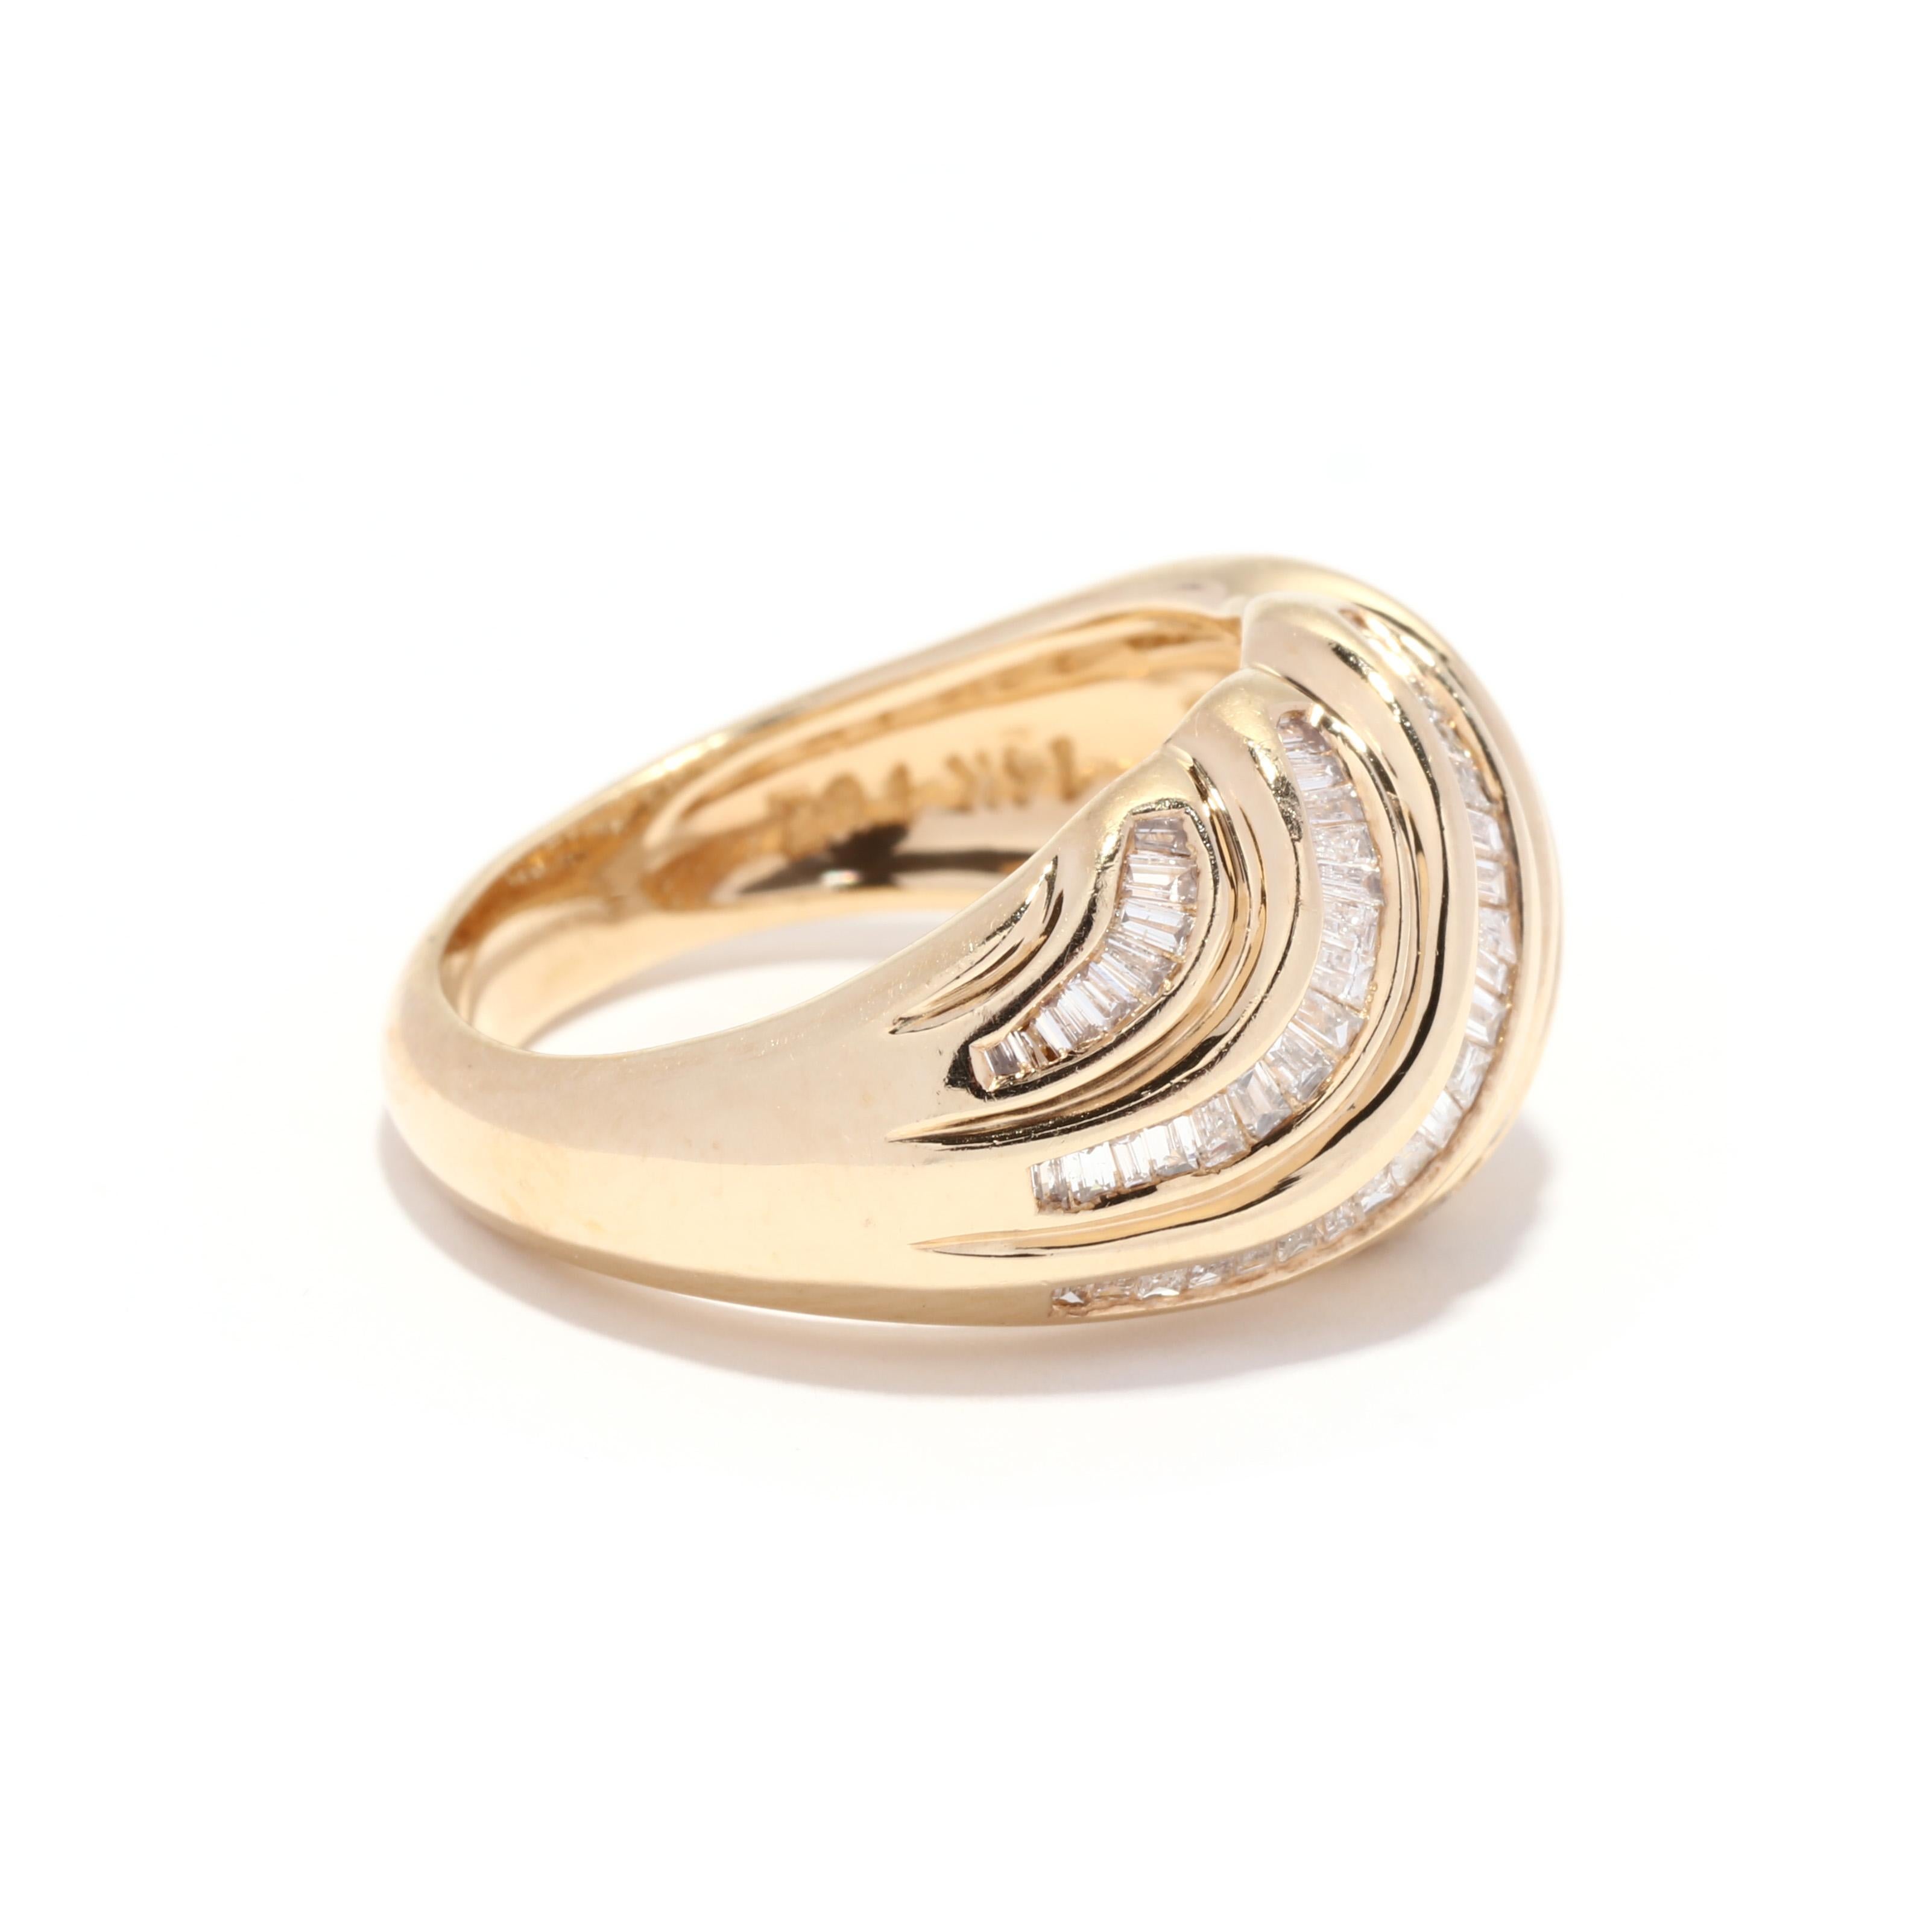 A vintage 14 karat yellow gold diamond croissant ring. This ring features a ribbed dome design with full cut round diamonds weighing approximately .38 total carats and baguette cut diamonds weighing approximately .66 total carats and with tapered